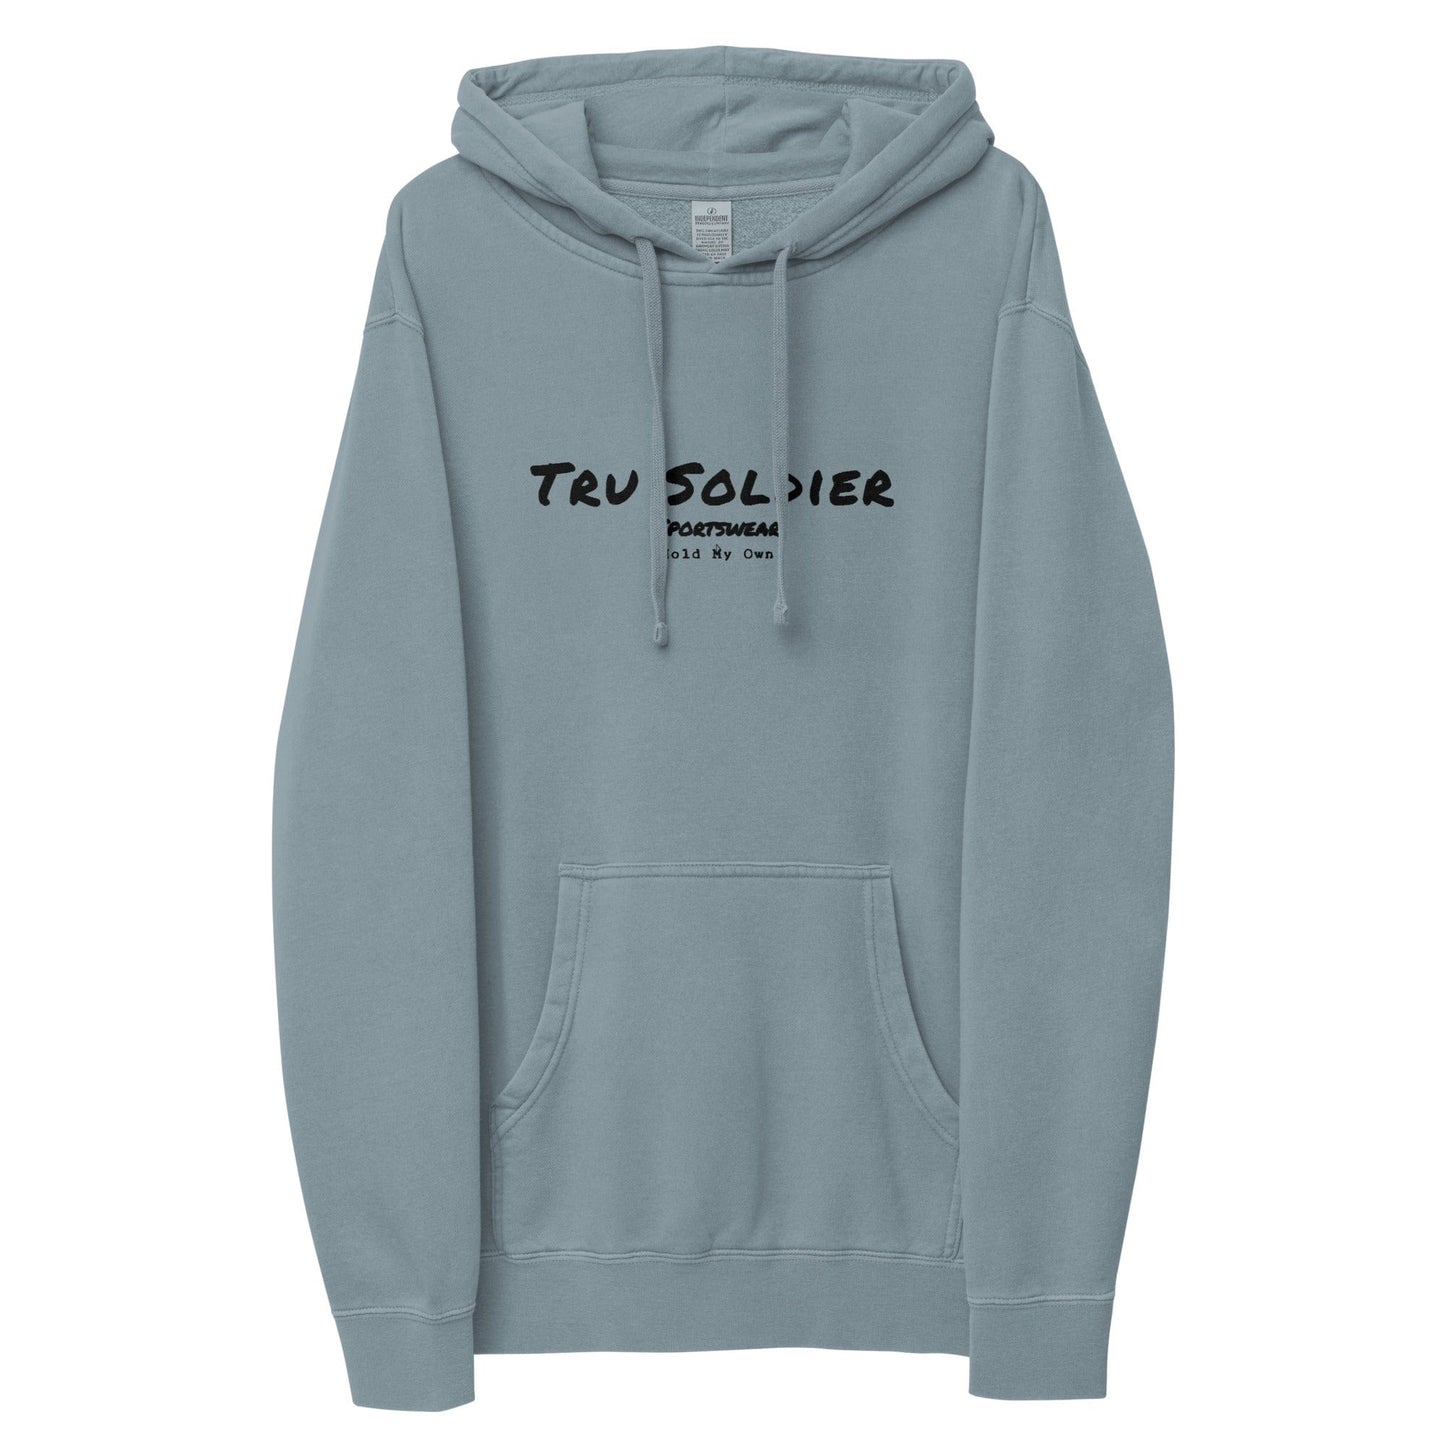 Tru Soldier Sportswear  Pigment Slate Blue / S Signature embroidered Unisex pigment-dyed hoodie